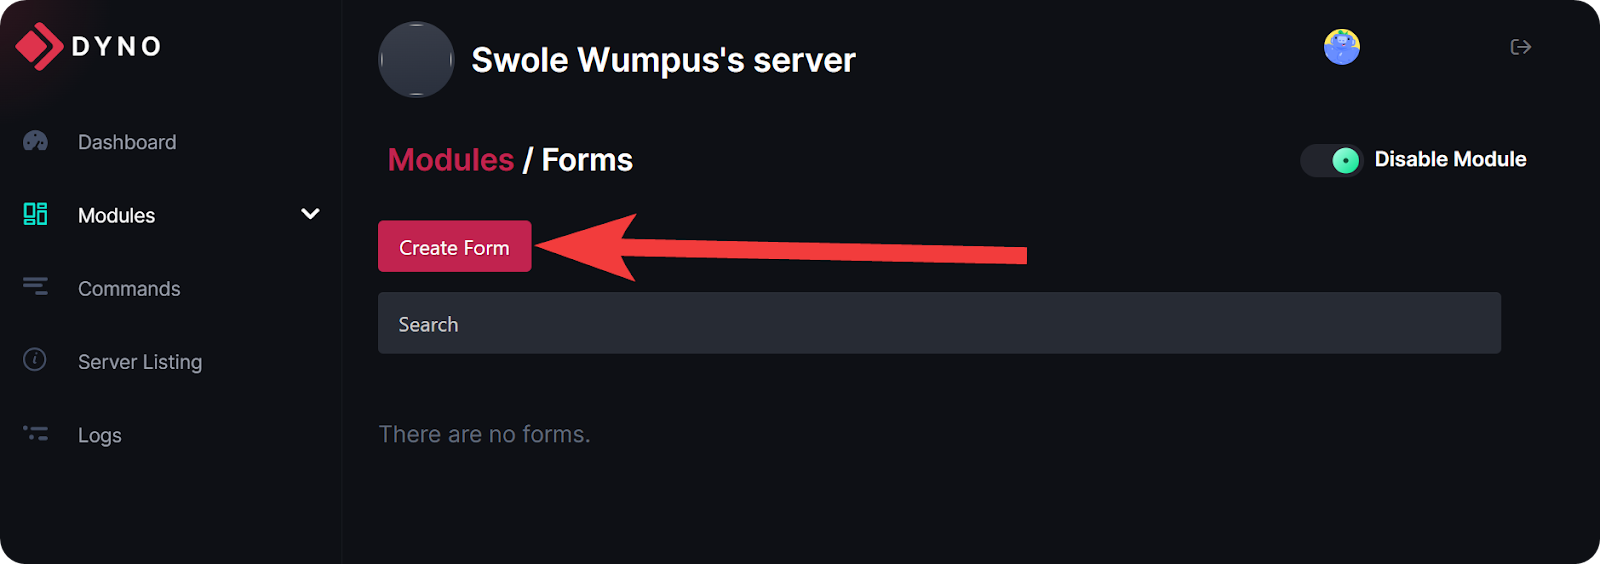 The Forms module view in Dyno's dashboard with an arrow to the Create Form button